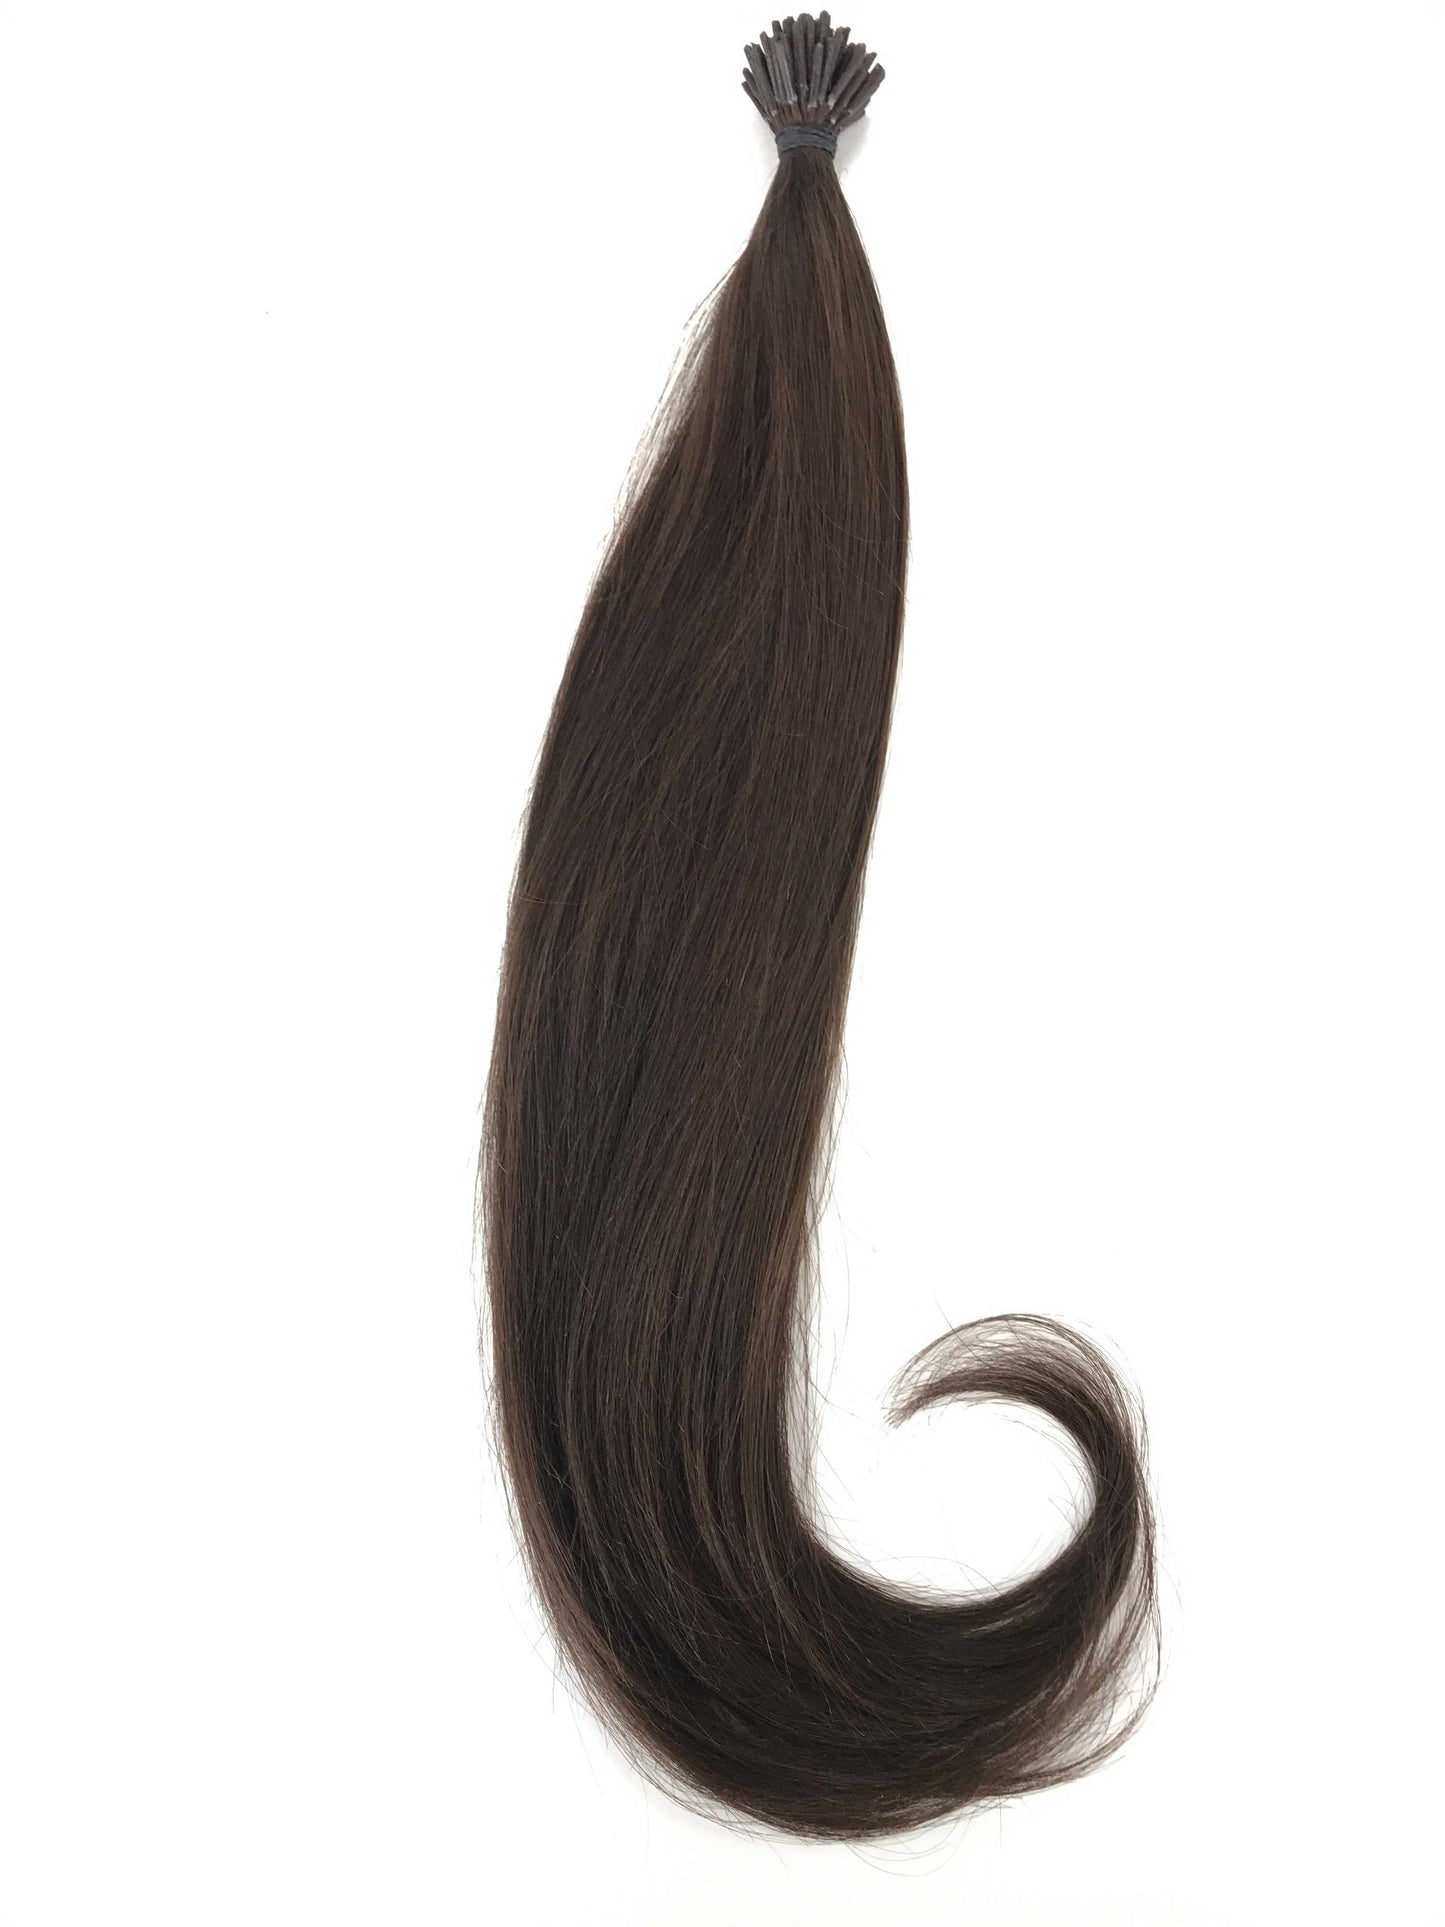 Extensions de cheveux humains vierges russes, 0,7 g i-Tip Micro Rings-Virgin Hair & Beauty, les meilleures extensions de cheveux, vrais cheveux humains vierges.